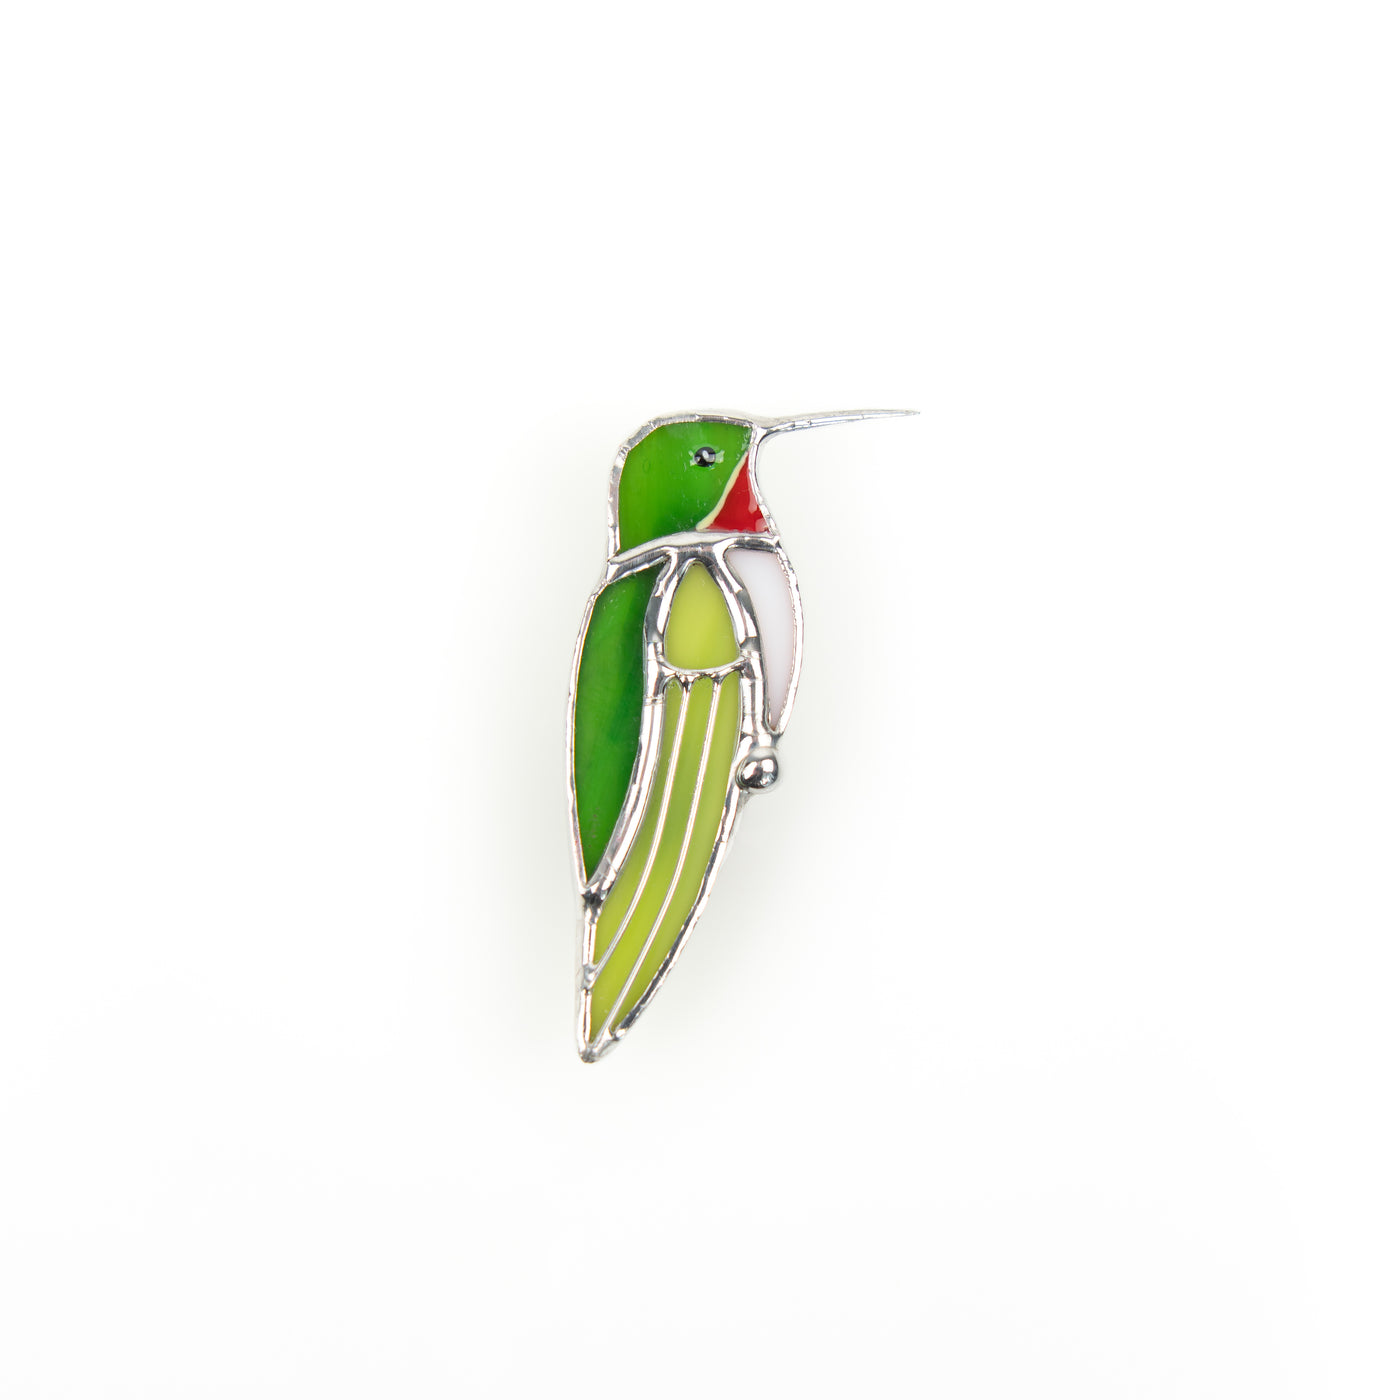 Stained glass pin of a green hummingbird